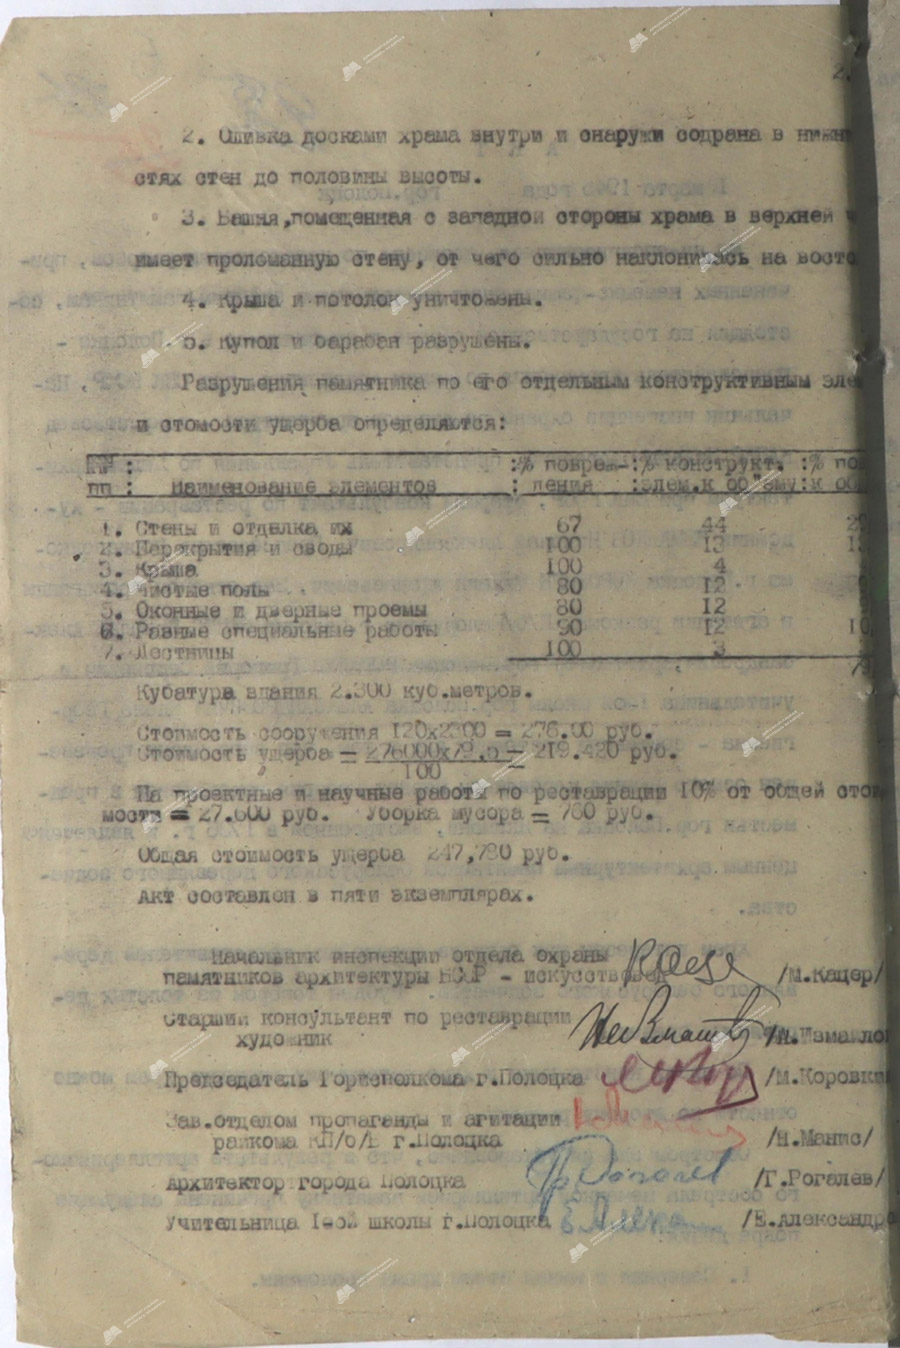 Acts of the commission of the Polotsk City Executive Committee to establish the damage caused by the Nazi invaders to the architectural monuments of Polotsk-стр. 10